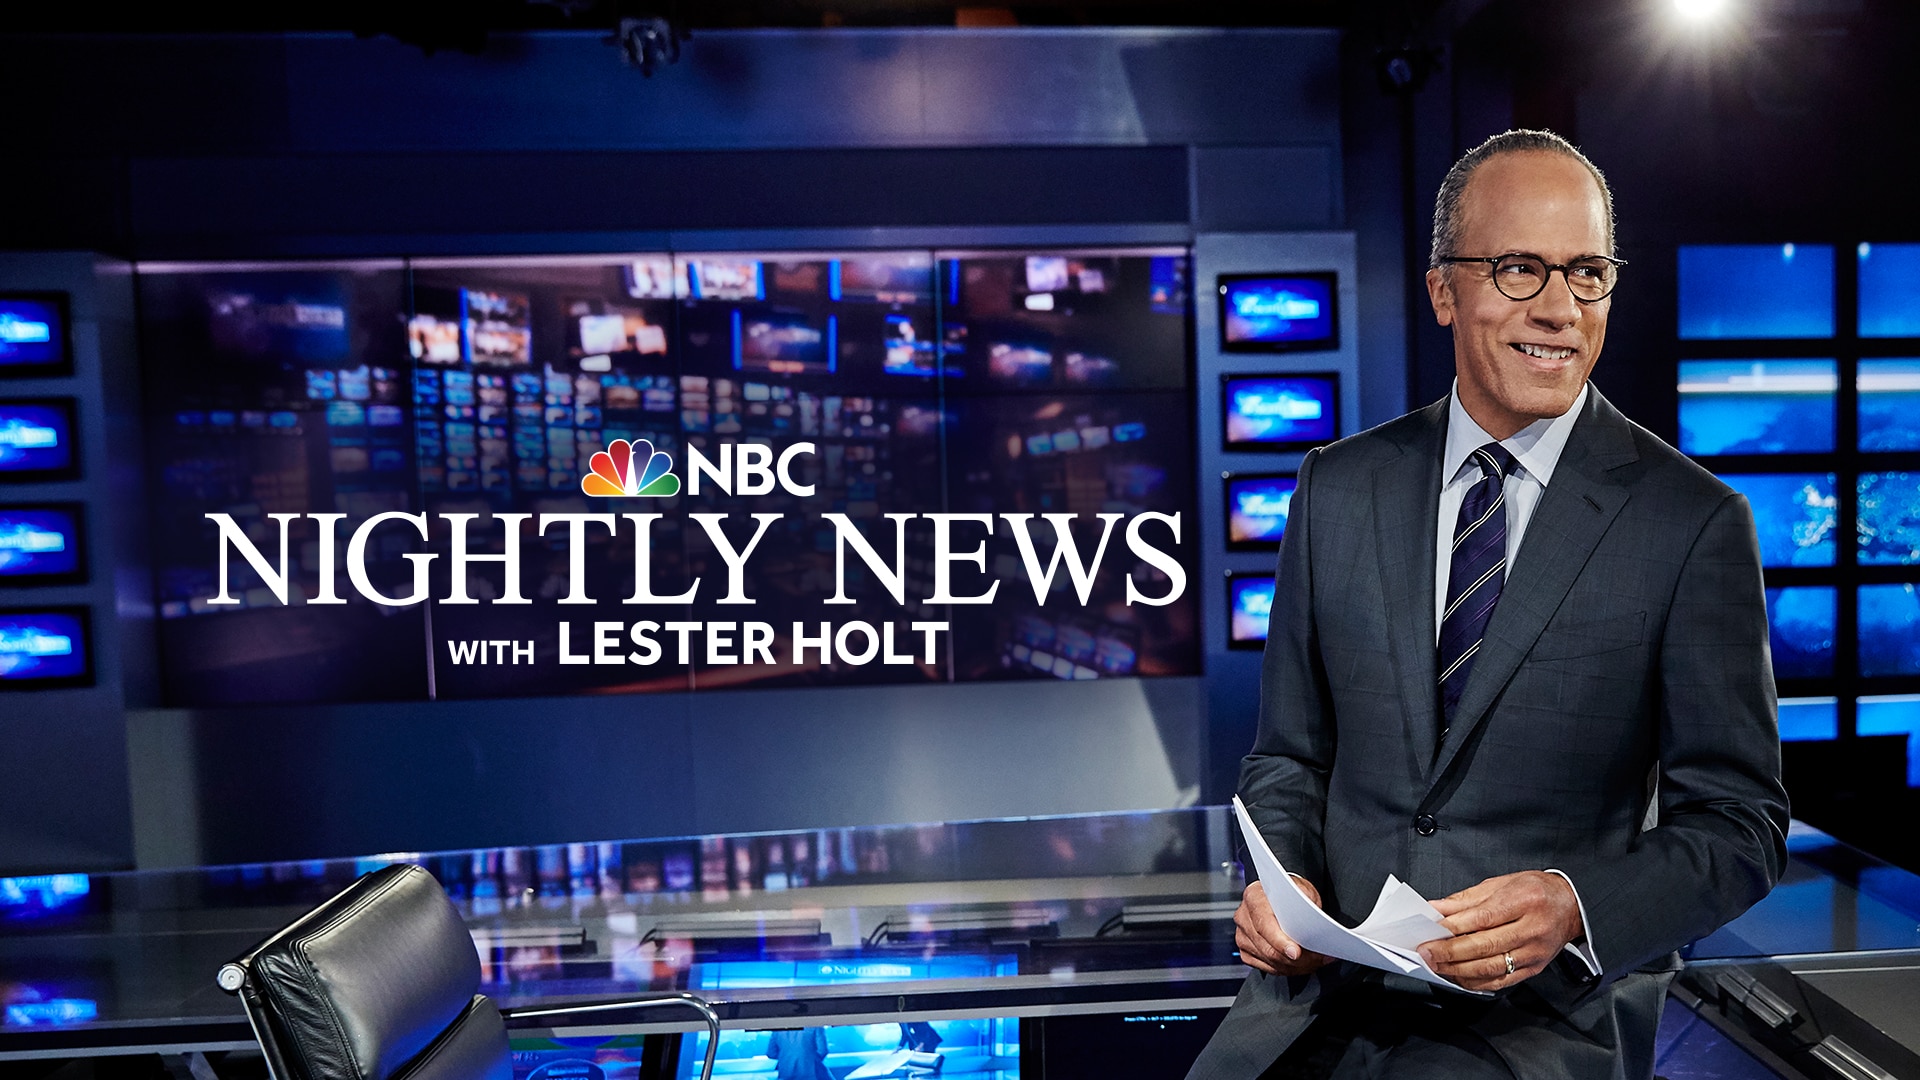 NBC Nightly News with Lester Holt on FREECABLE TV